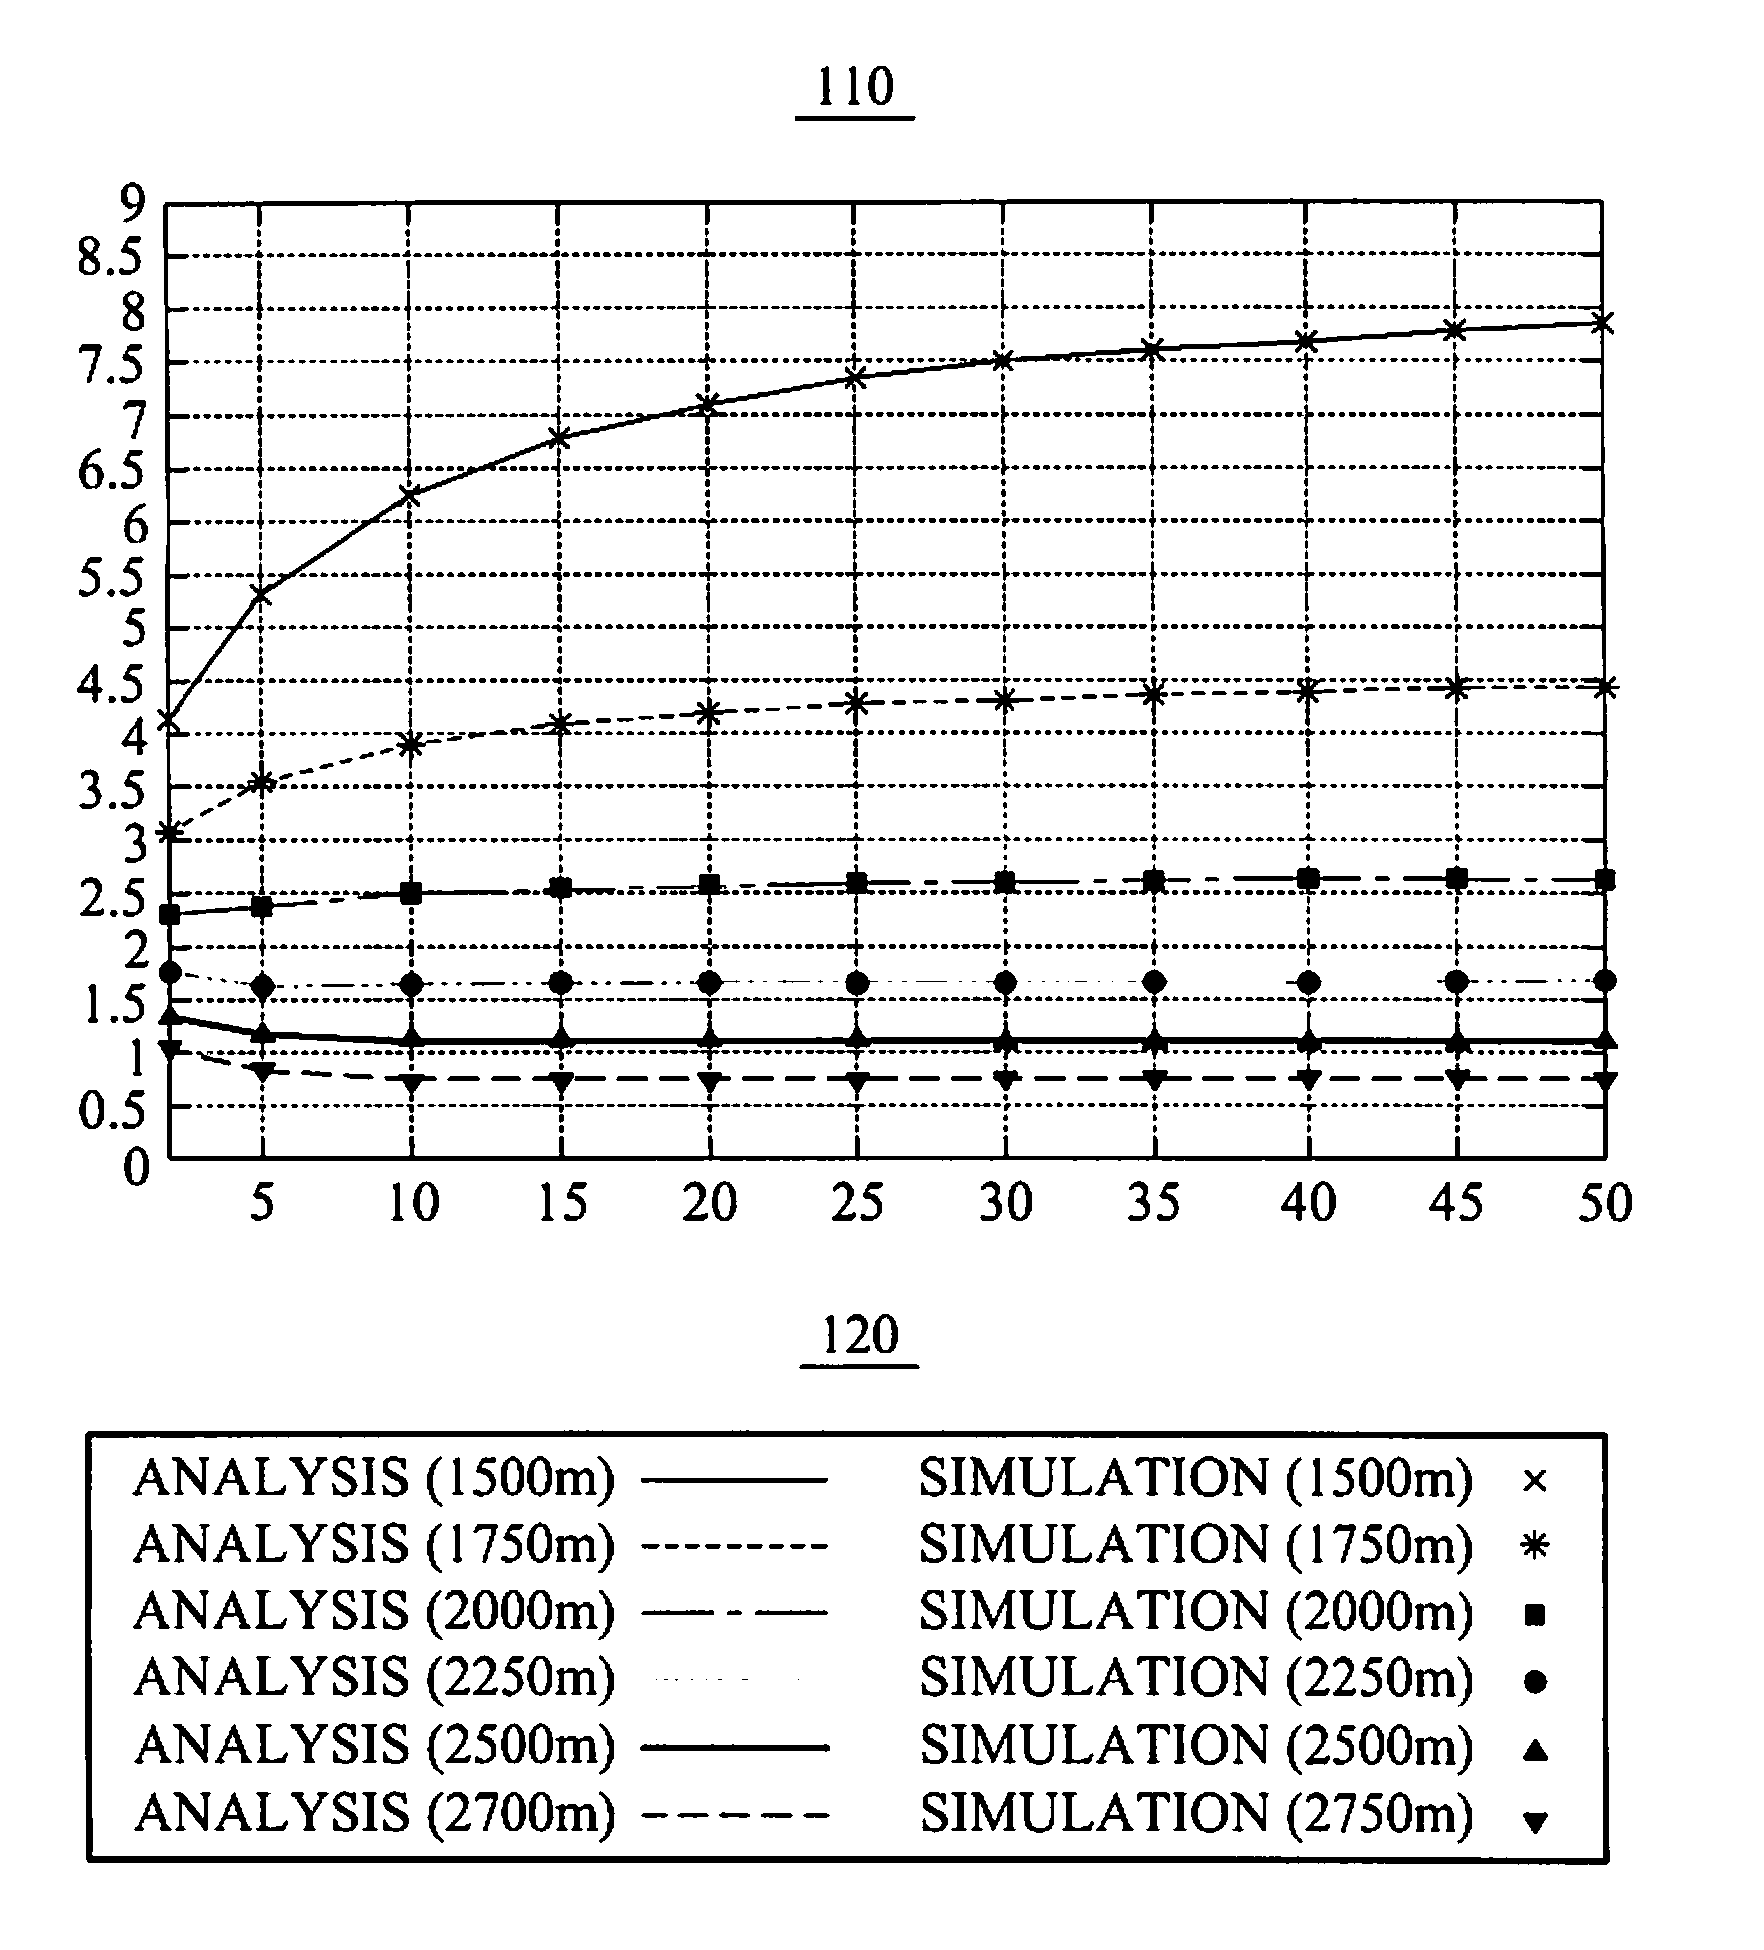 Wireless communication system for efficient multicast transmission using adaptive modulation and coding mechanism